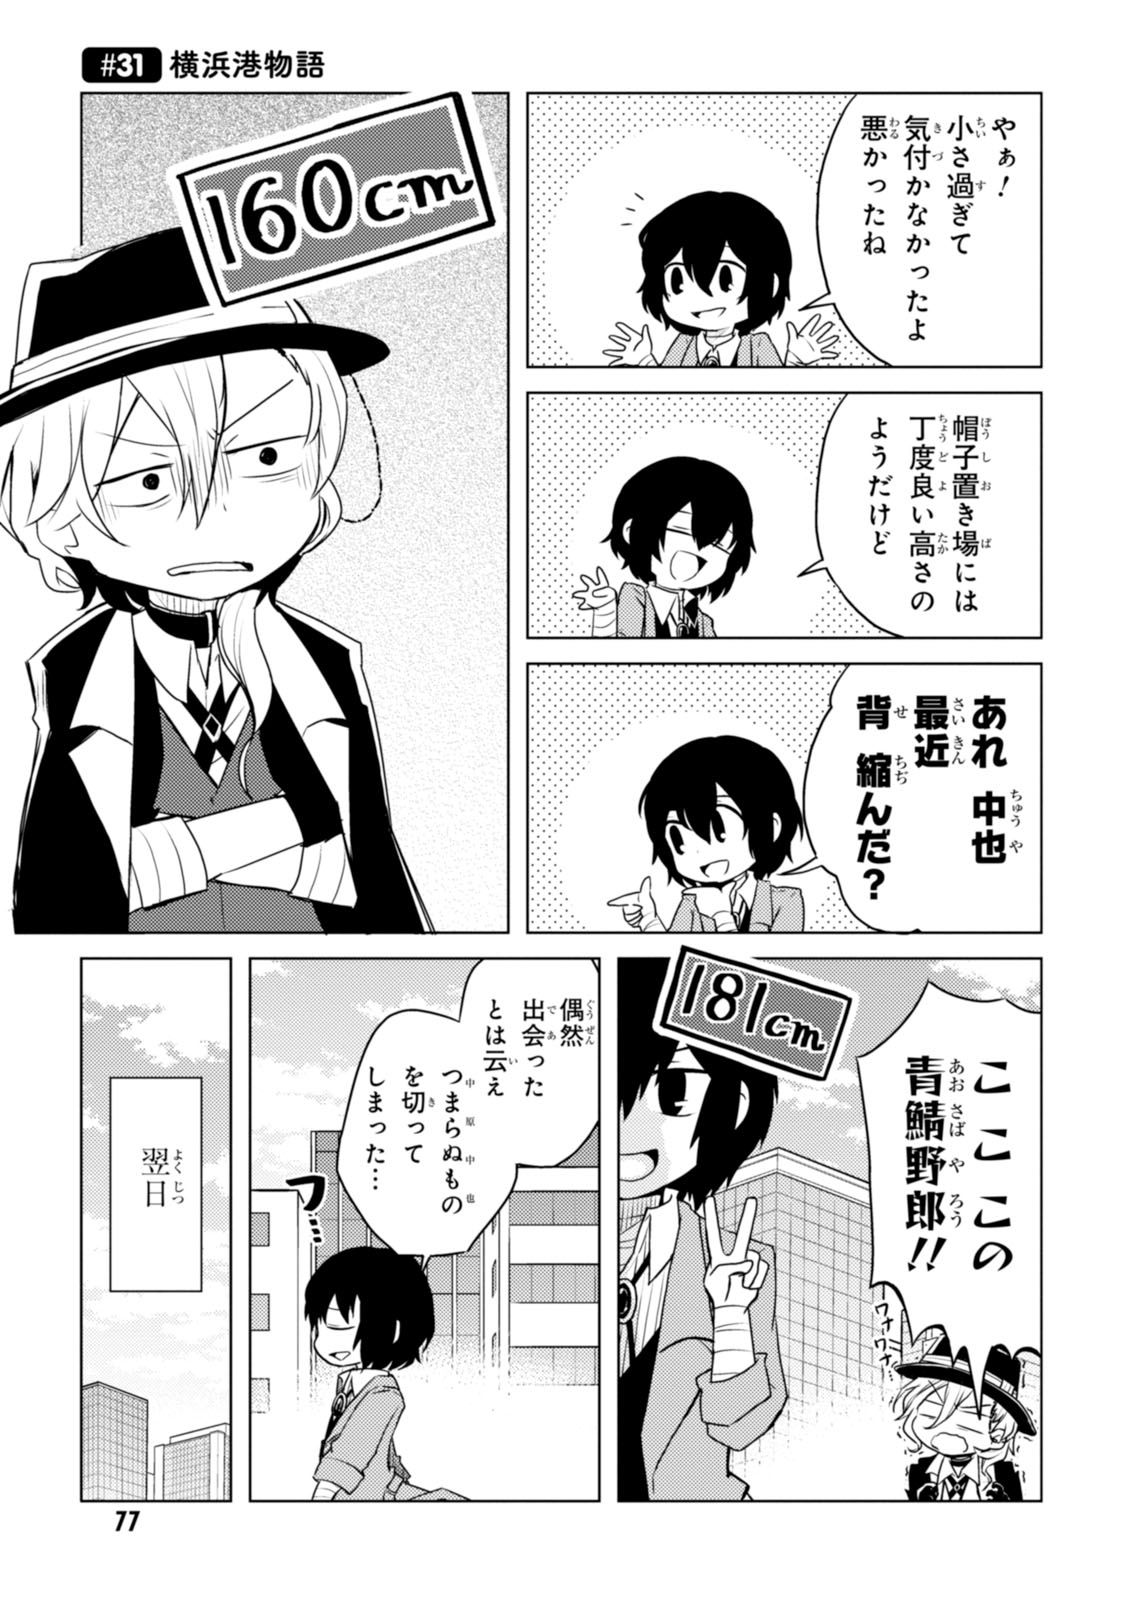 Wan! Chapter 31. Bungo Stray Dogs